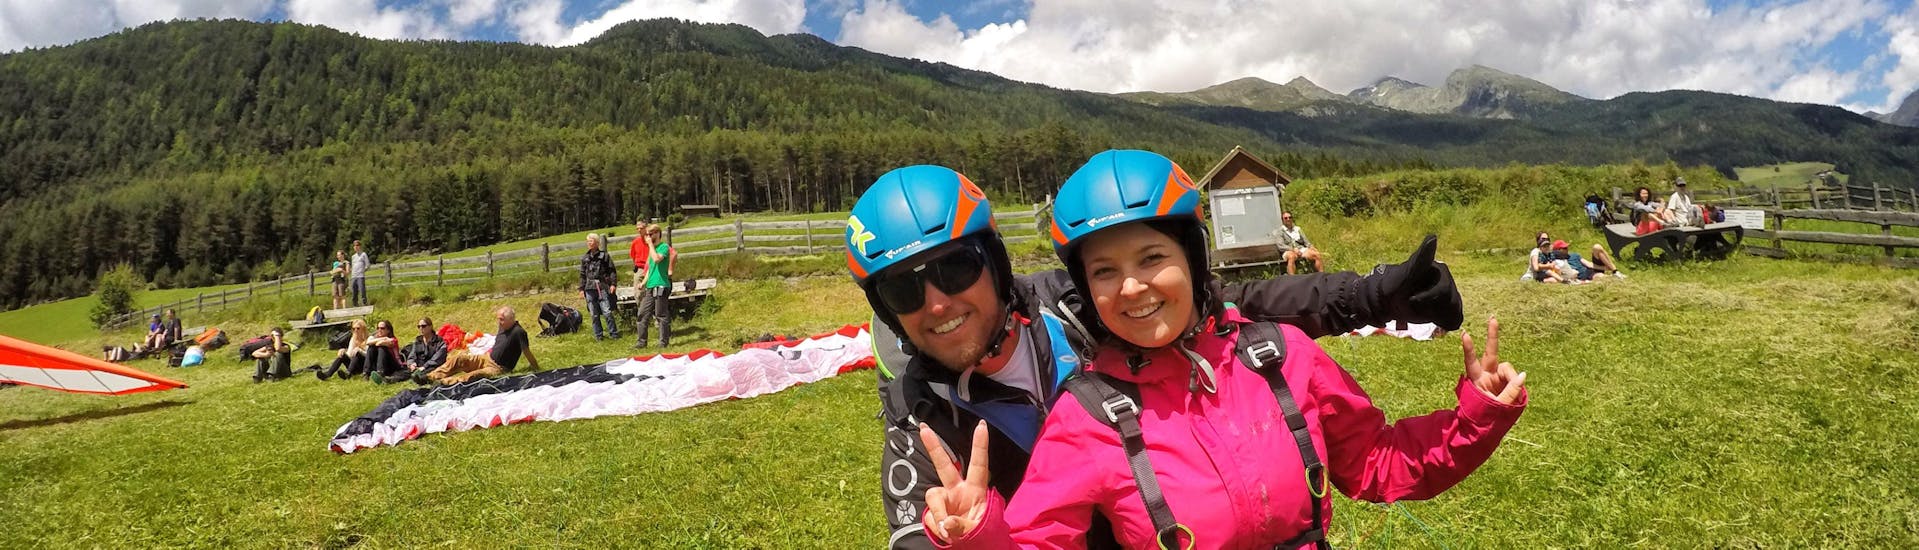 Tandem Paragliding in Val Pusteria - Hike & Fly.